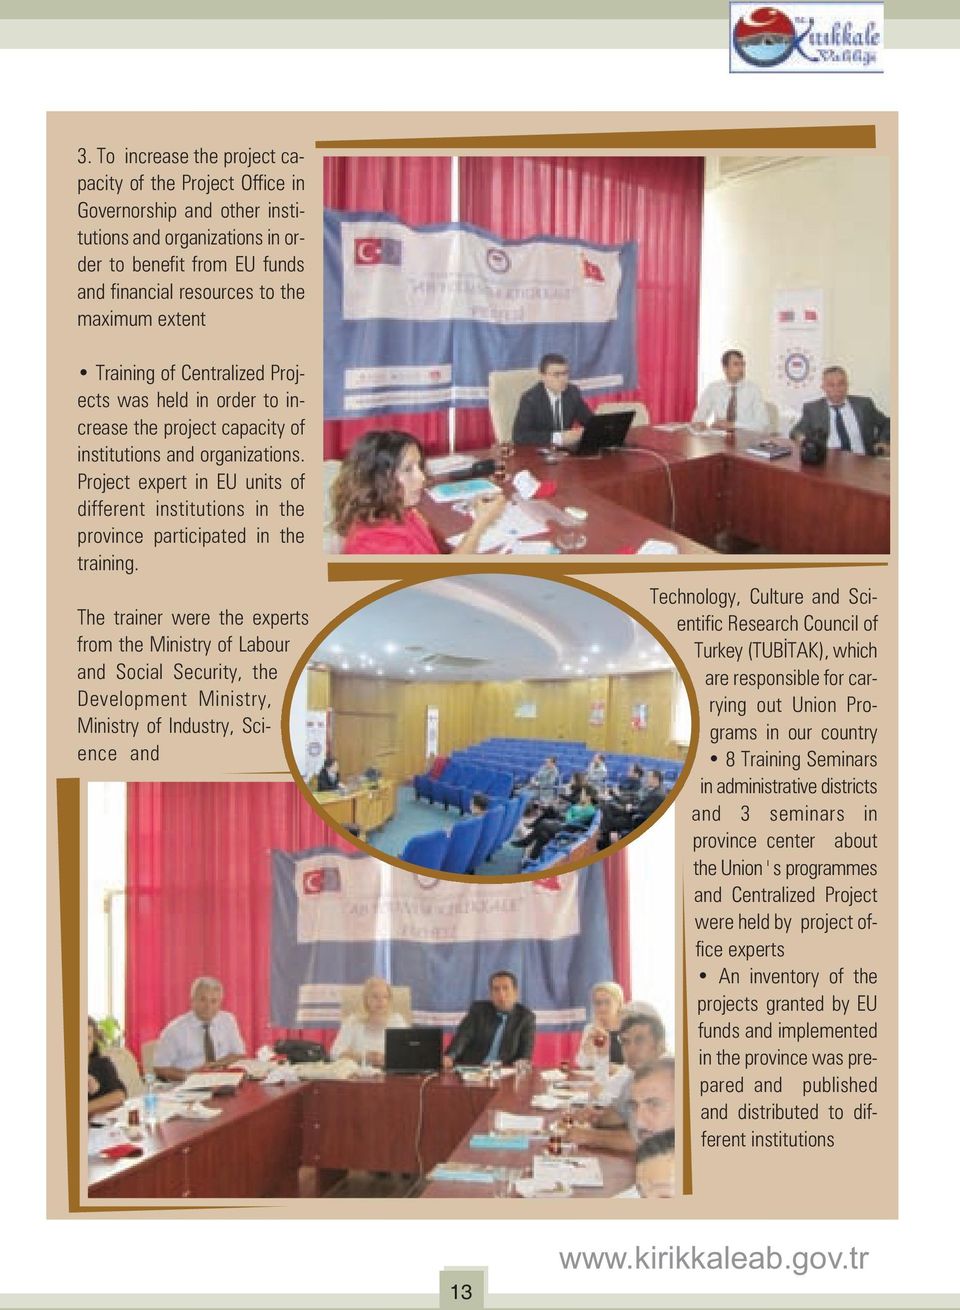 Training of Centralized Projects was held in order to increase the project capacity of institutions and organizations.